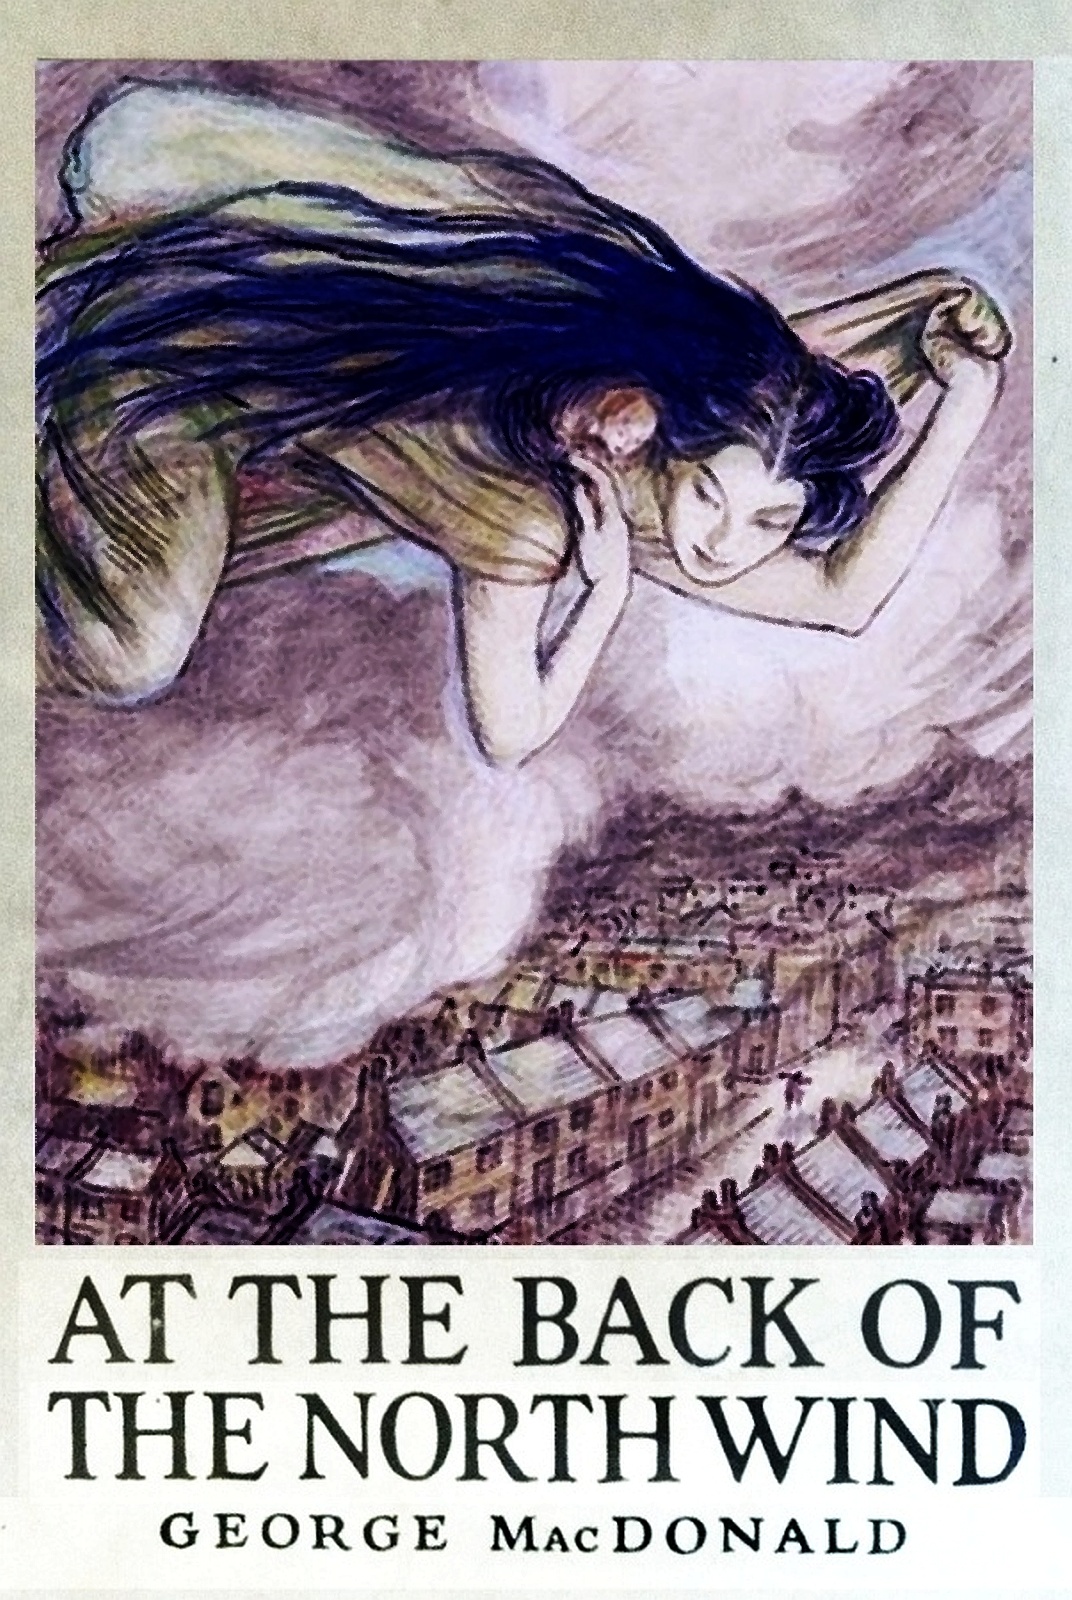 Book cover image for At the Back of the North Wind